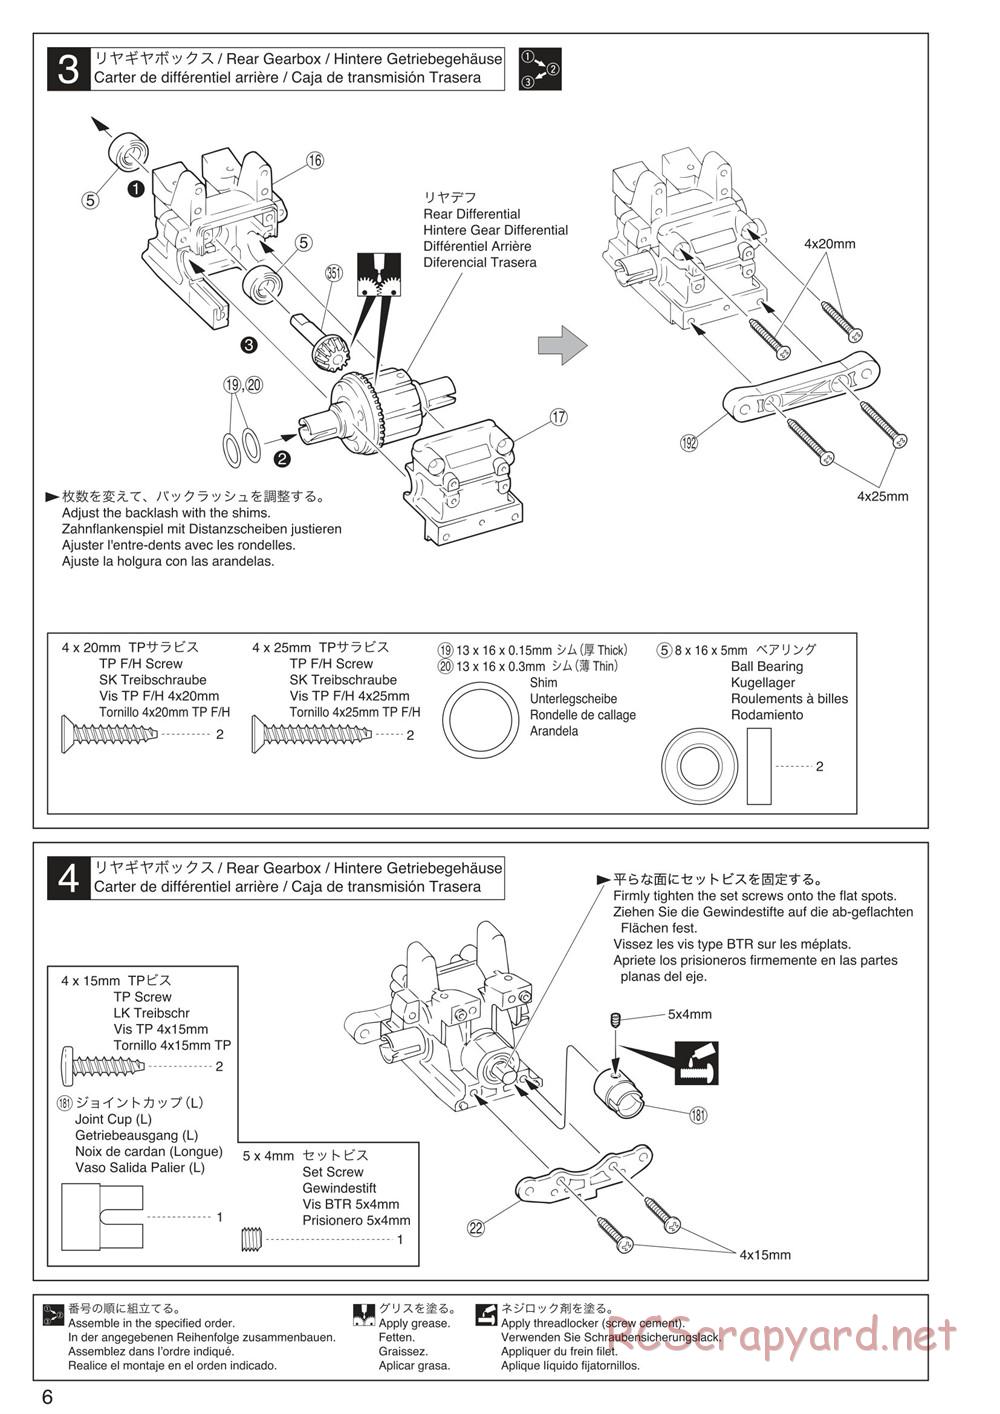 Kyosho - Inferno Neo ST 3.0 - Manual - Page 6